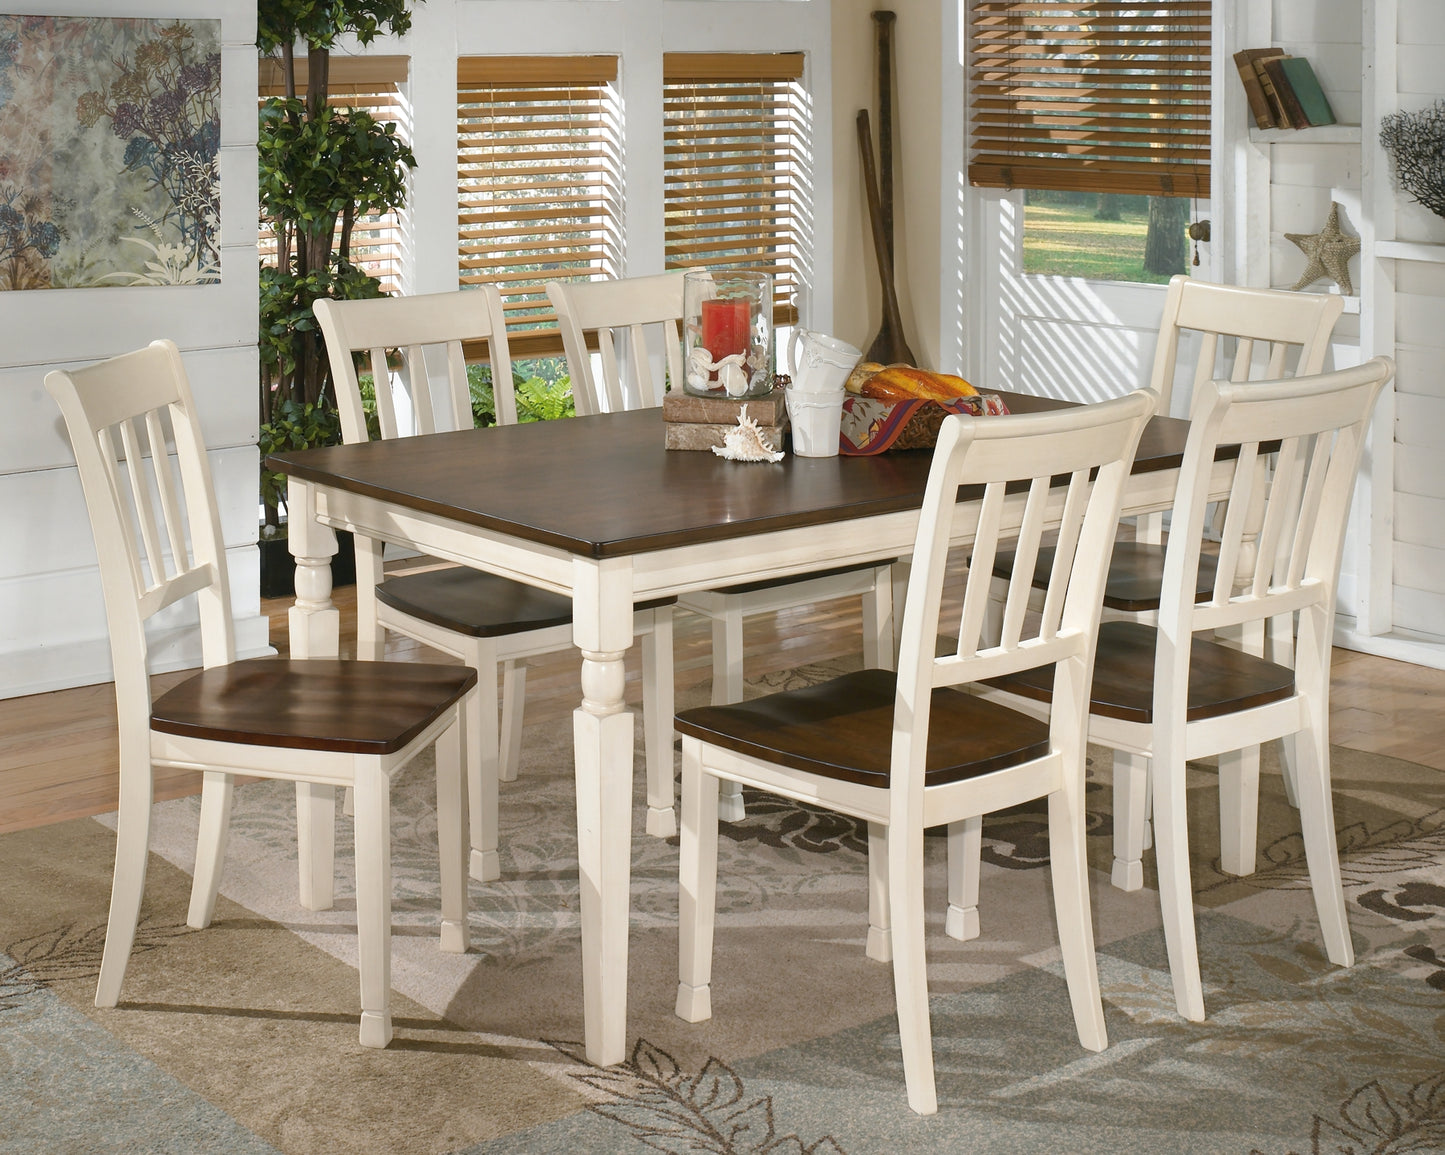 Ashley Express - Whitesburg Dining Chair (Set of 2)